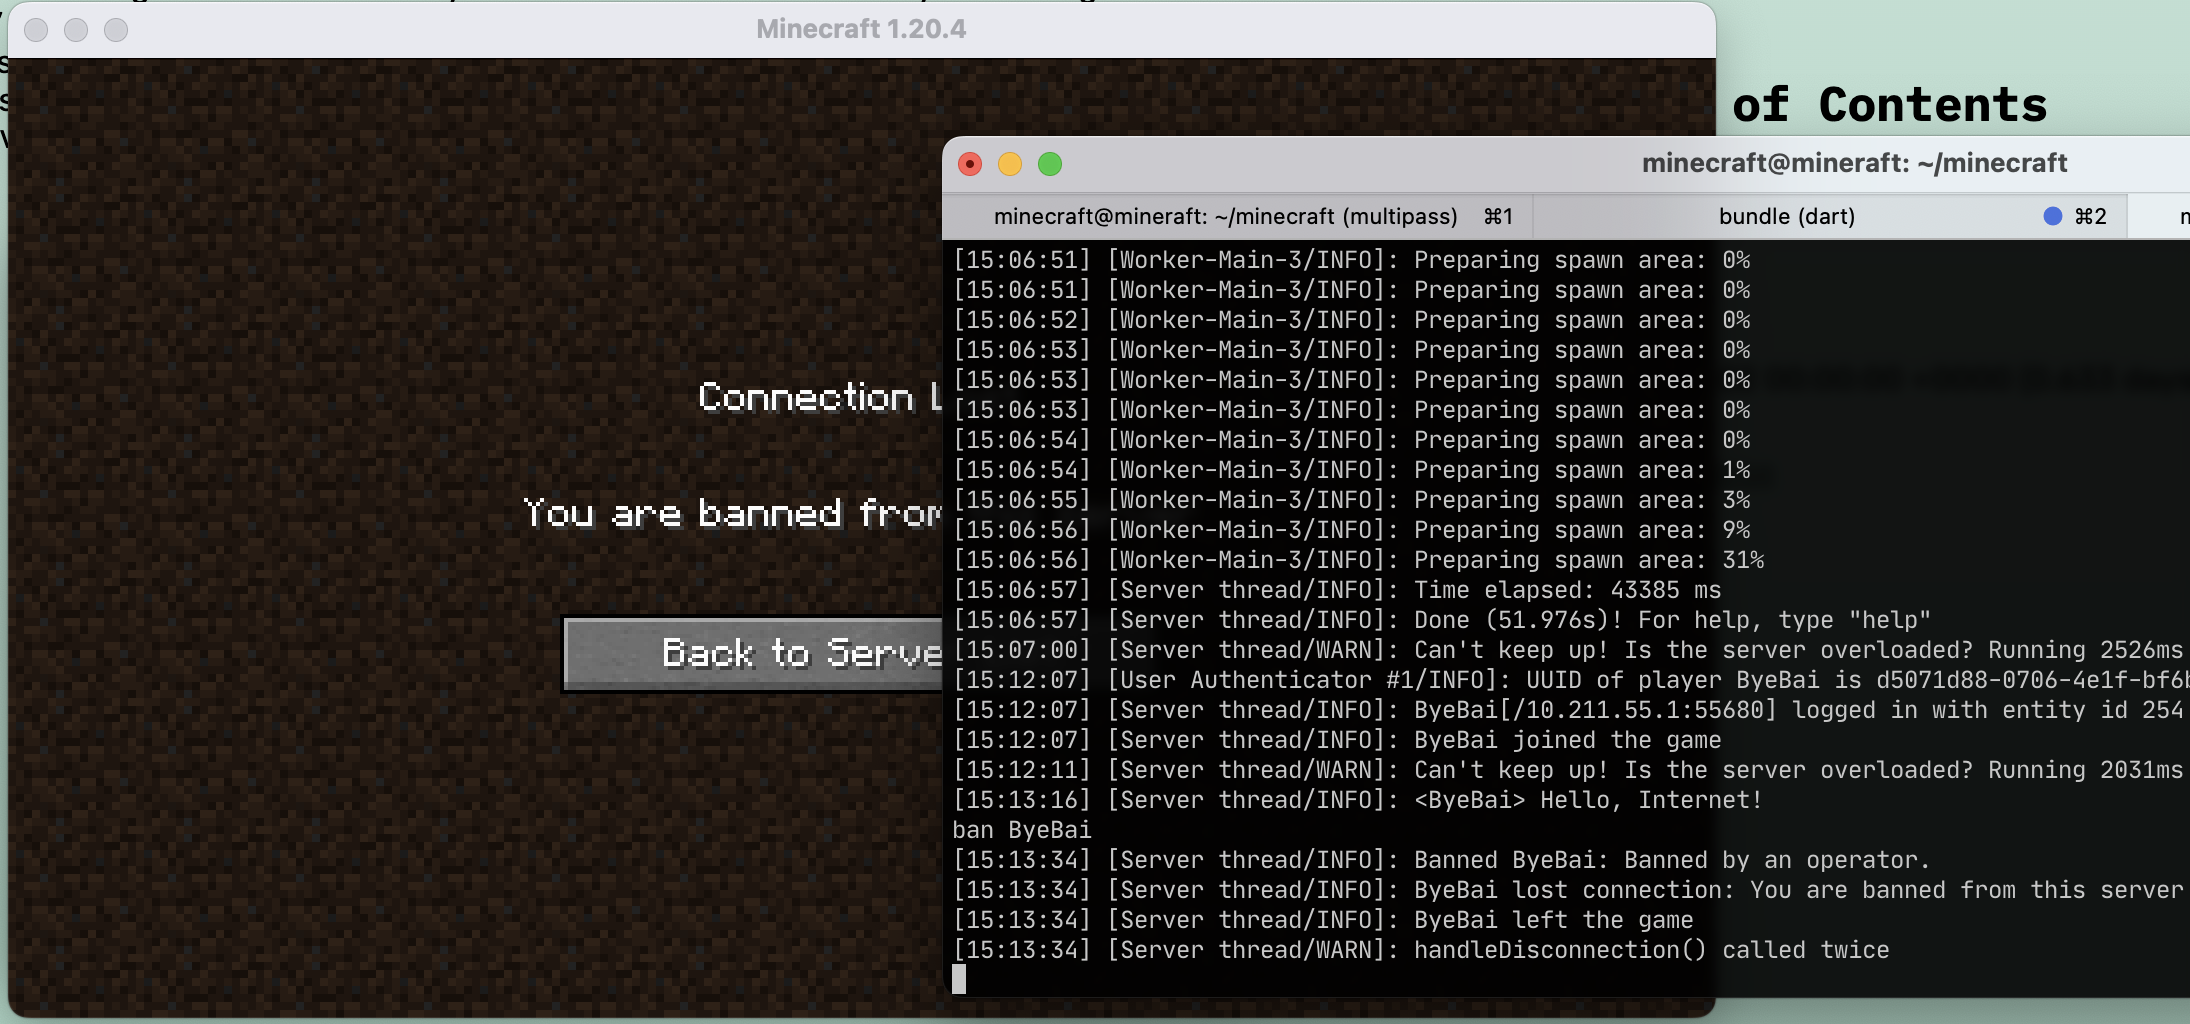 Two windows open: In one, a terminal window showing the player ByeBai as recently 
banned, the other a Minecraft window showing that the player 
was banned